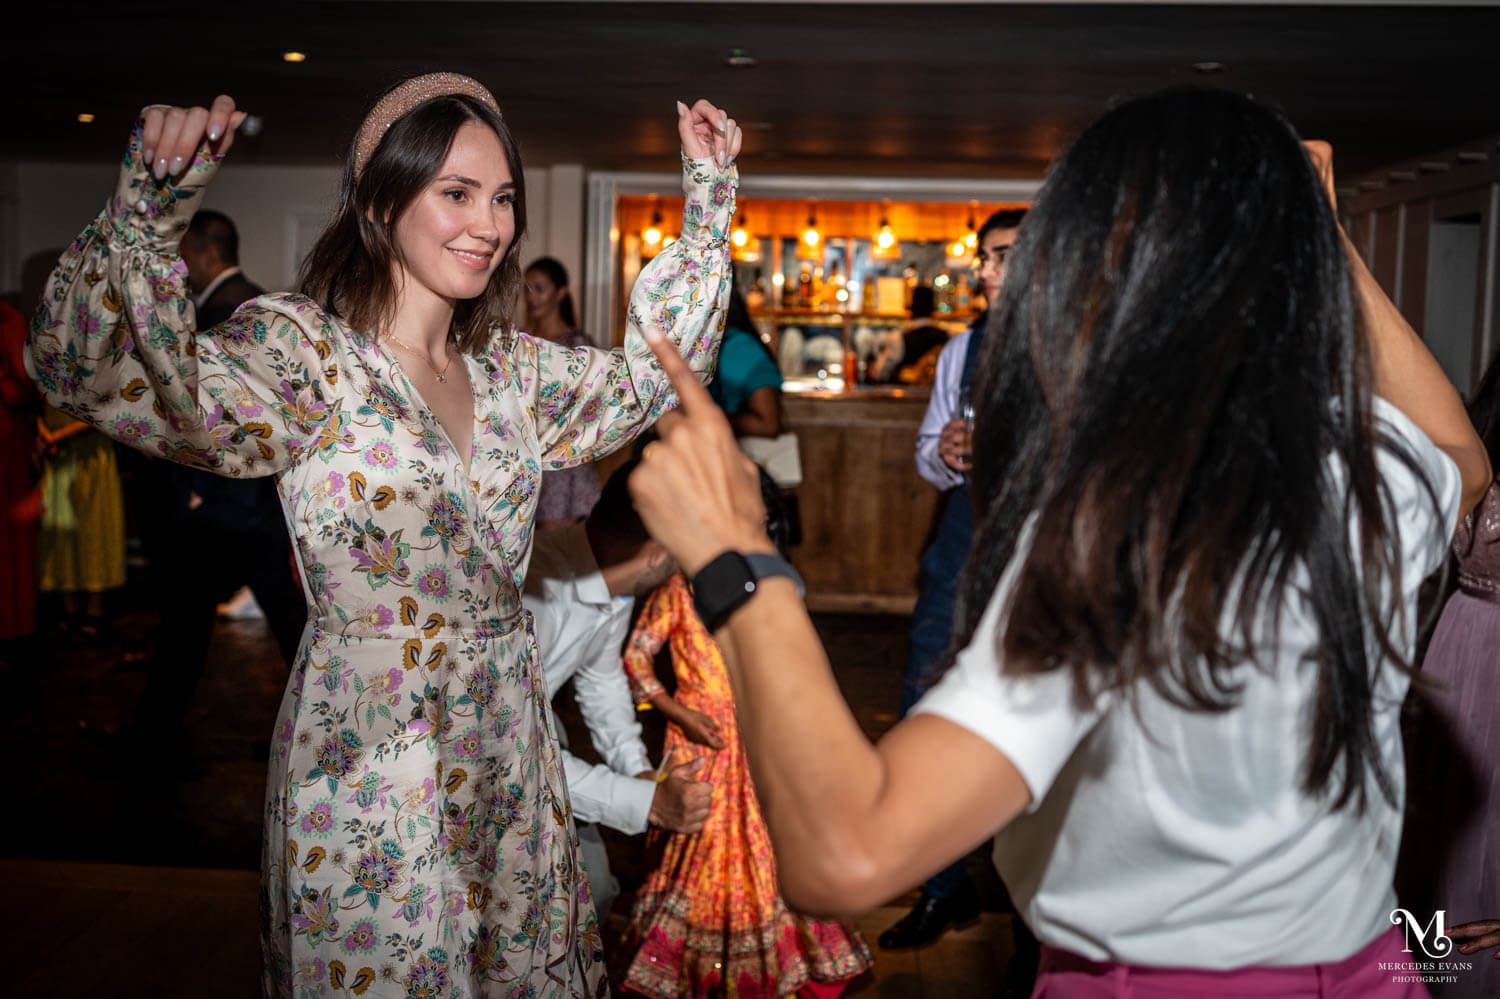 two women dance with arms in the air during the evening reception, the bar at millbridge court is in the background